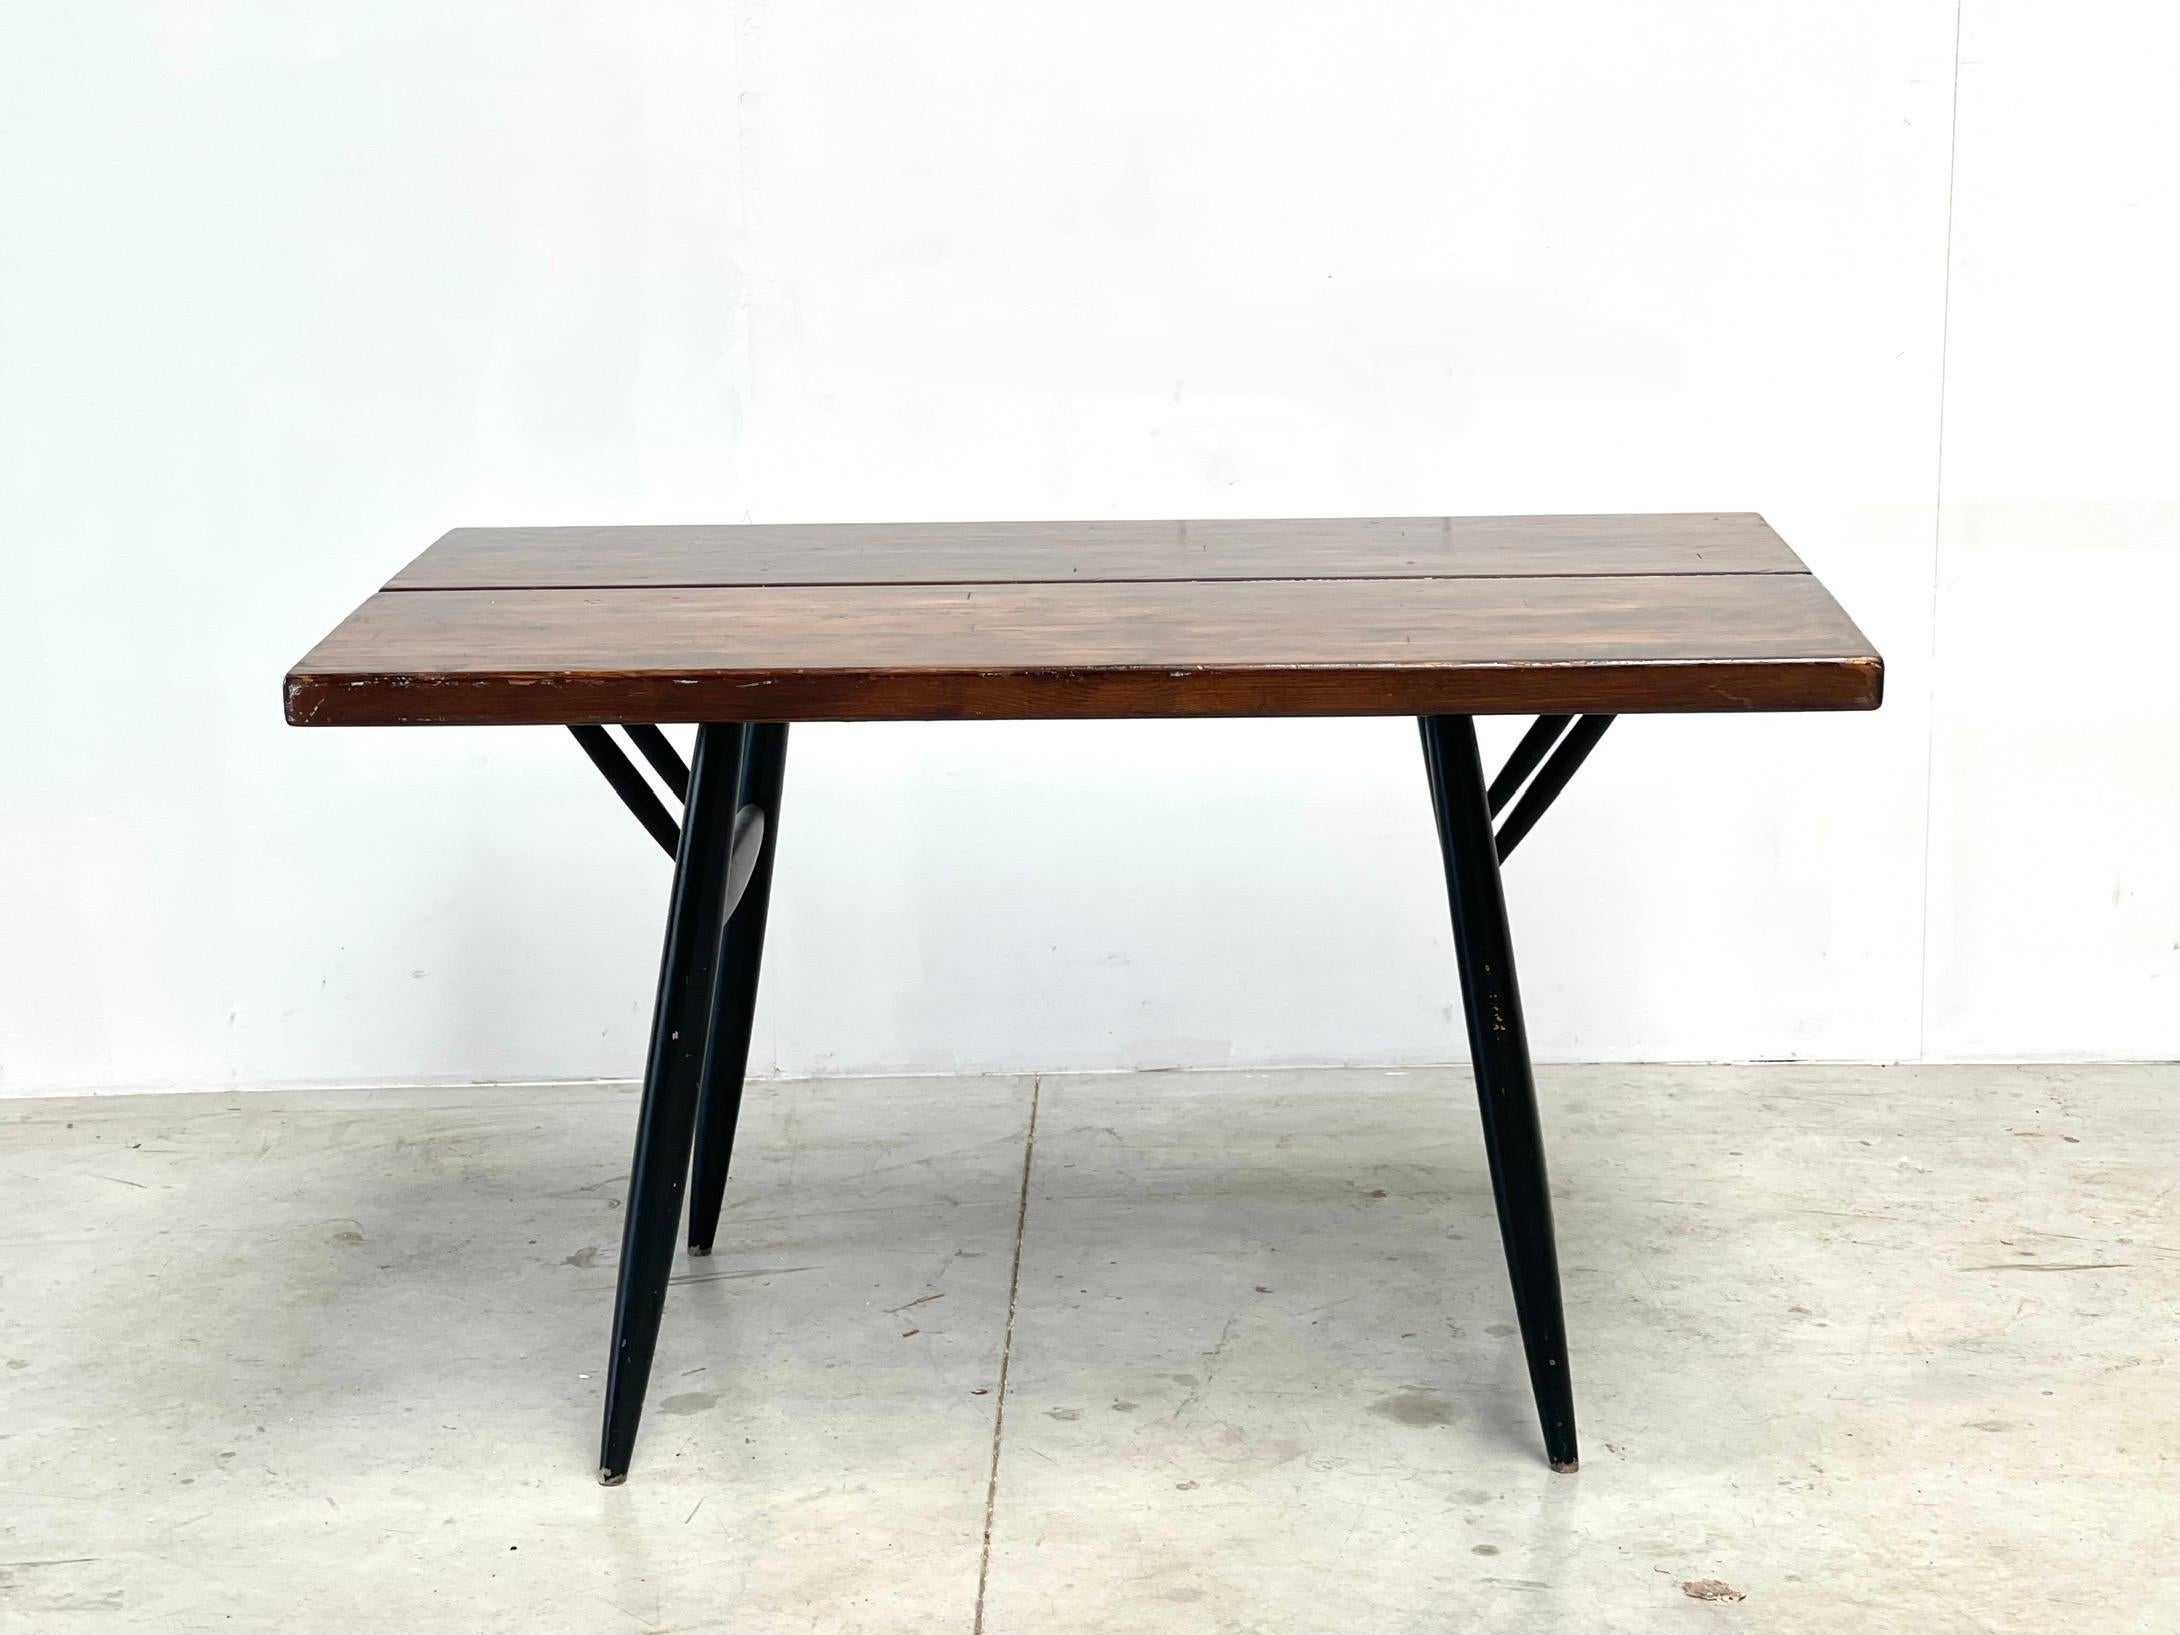 IImari Tapiovaara patinated dining table
This table was made in Finland in the 50's. It was designed by wellknown designer Ilmari Tapiovaara. He designed this table for for Asko, Finland. This table is a early production with still the orignal top.